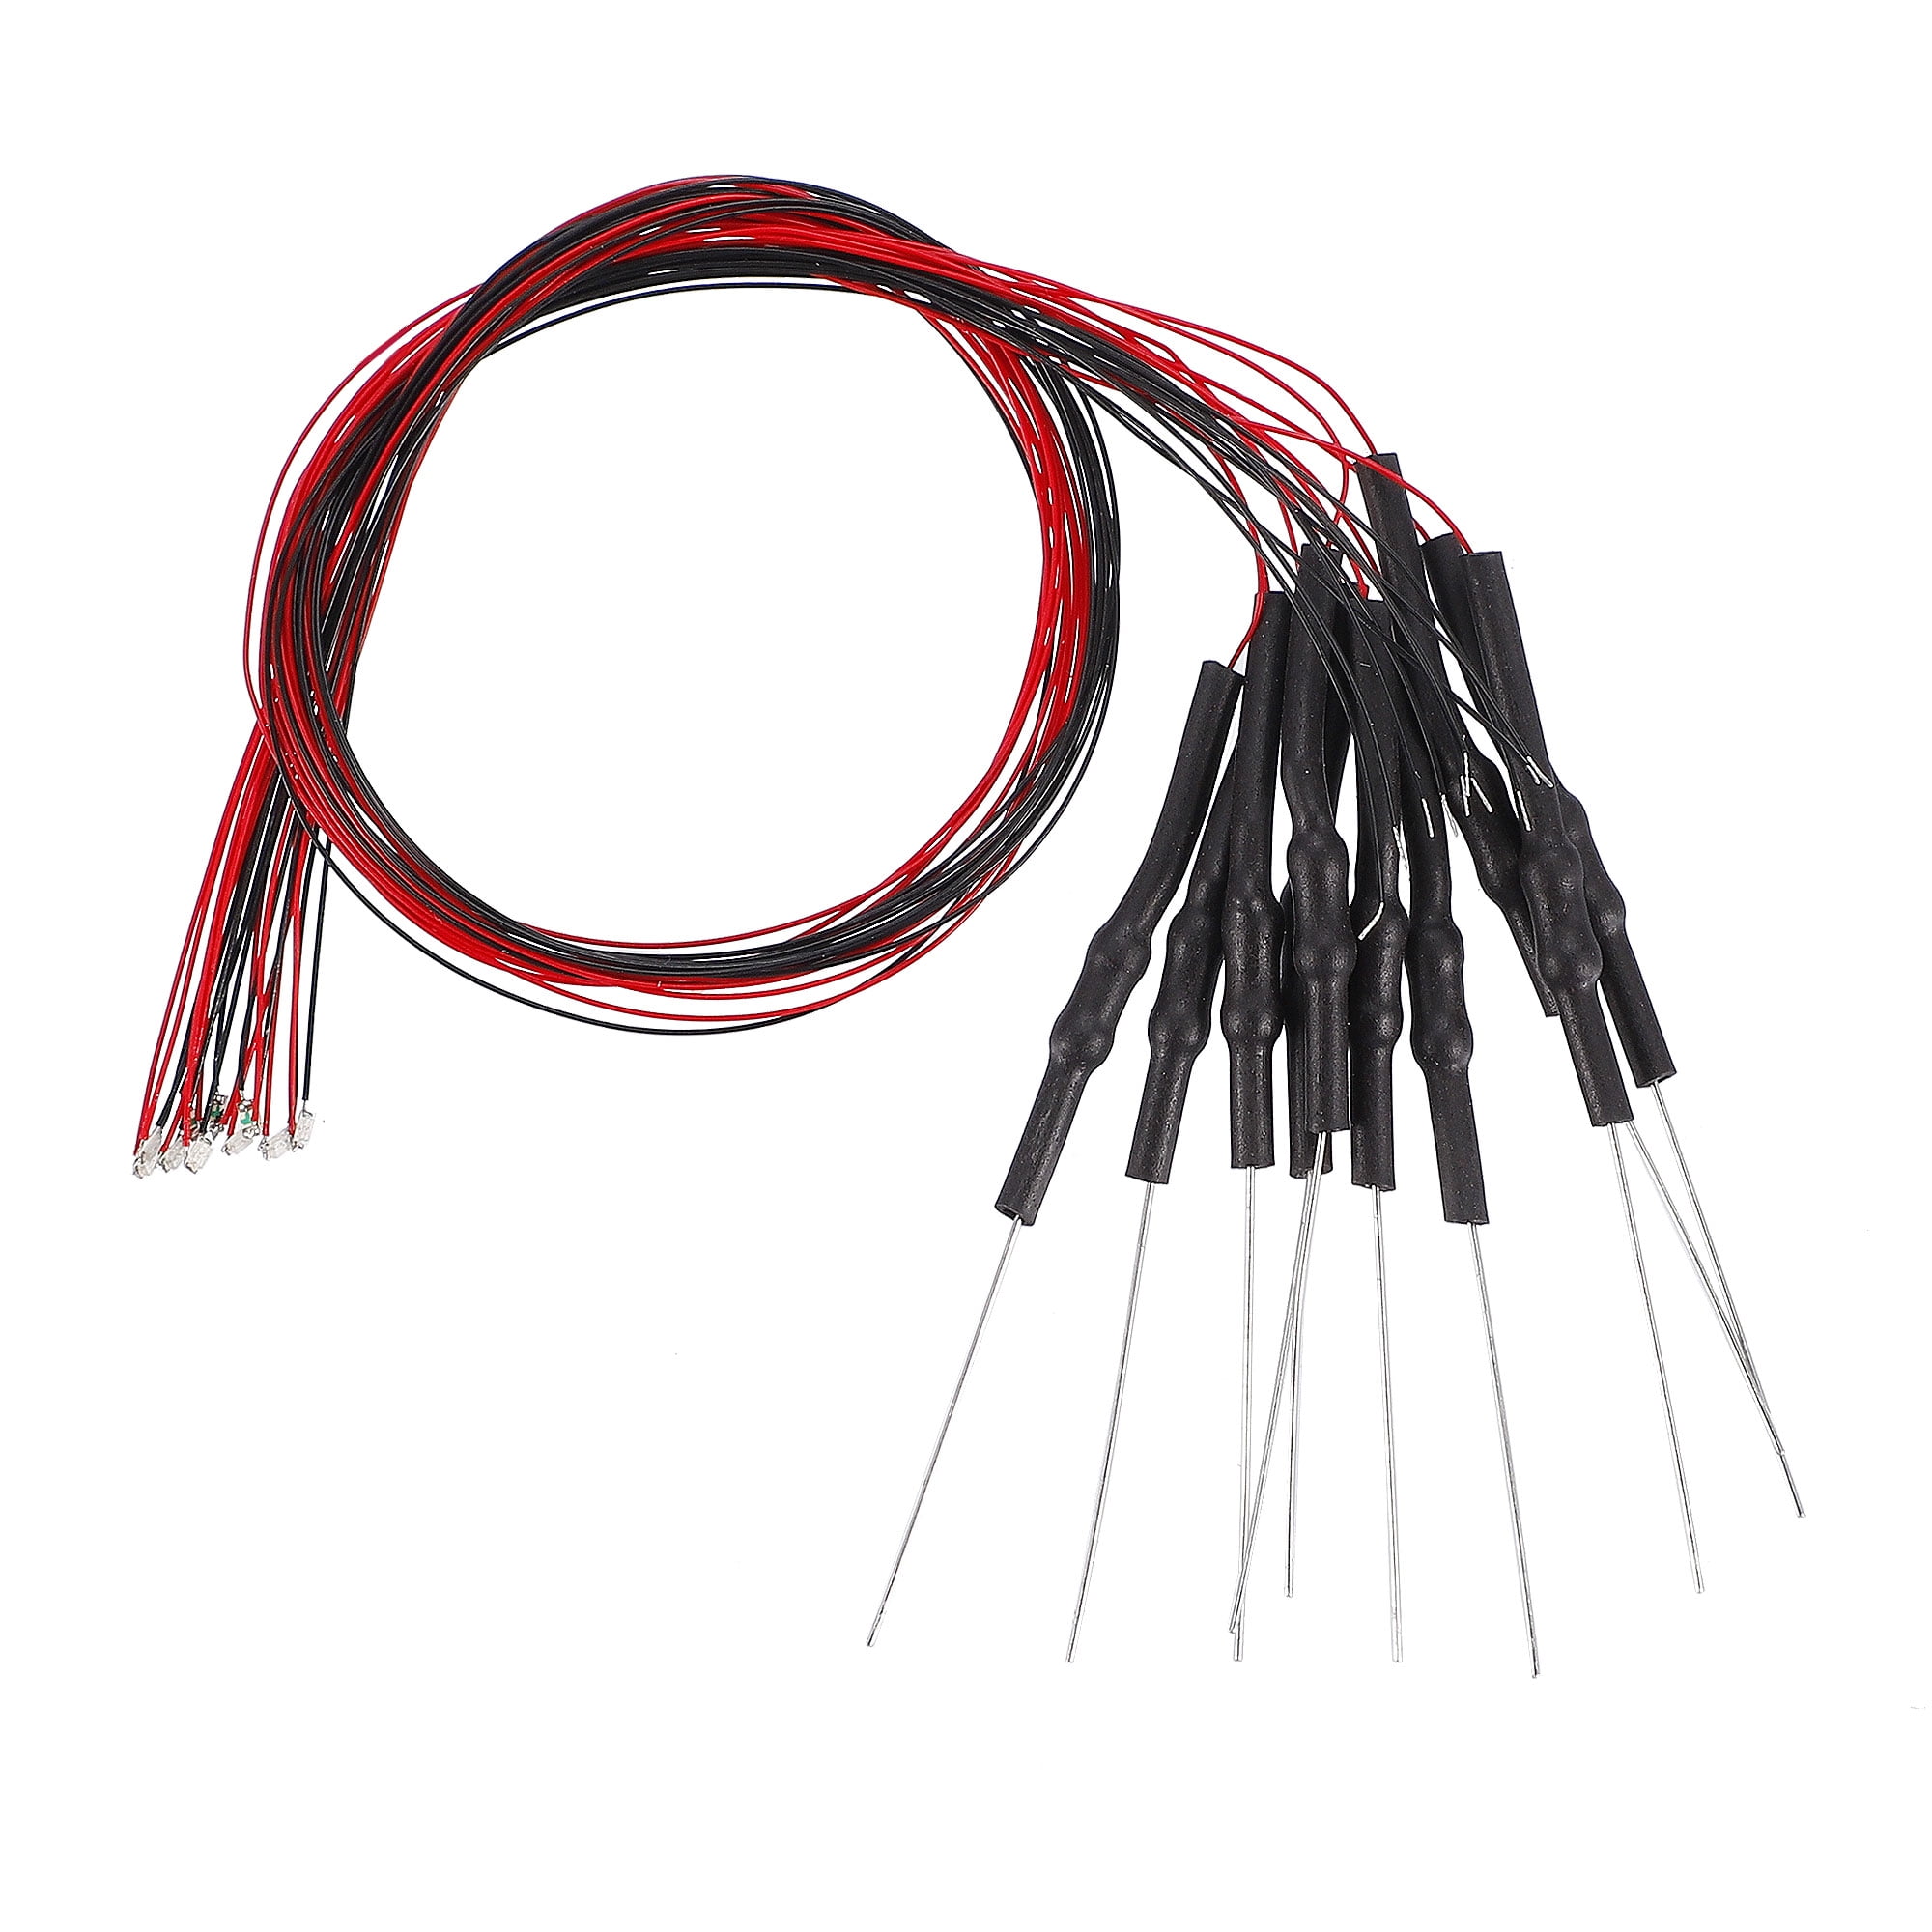 20Pcs 1.8mm Red Pre-Wired Round Top Water Clear Light DC 9-12v LED Diodes 20CM 